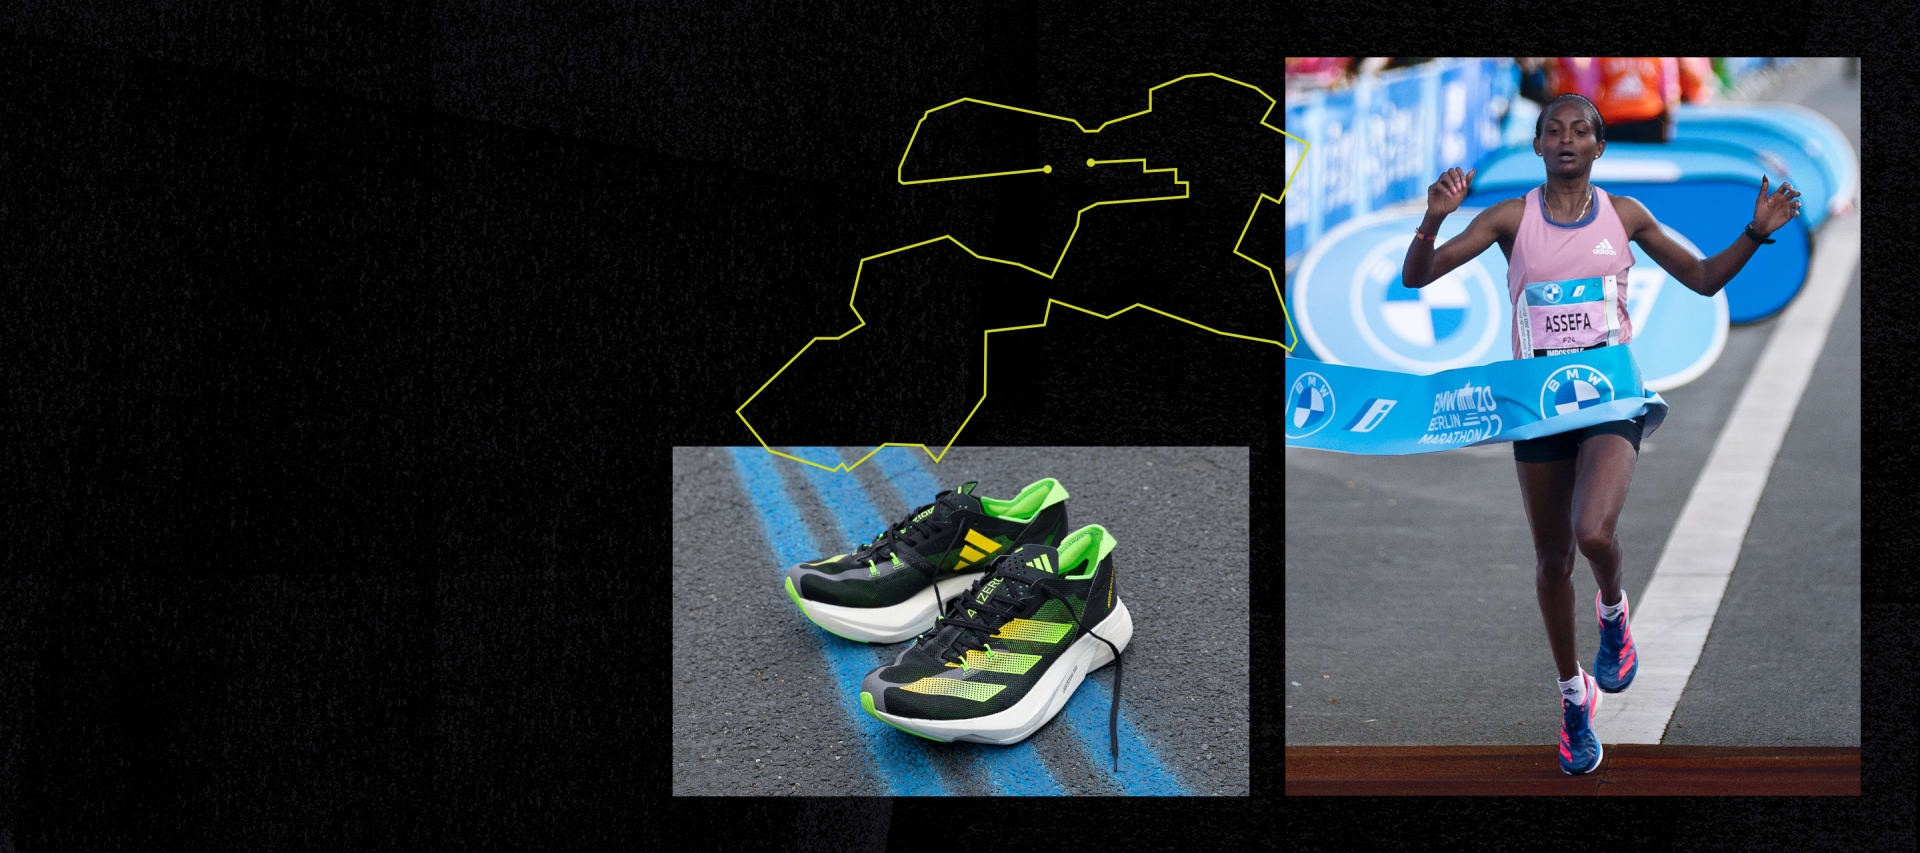 Image of athlete crossing the finish line and an image of a shoe with the outline of a race track.